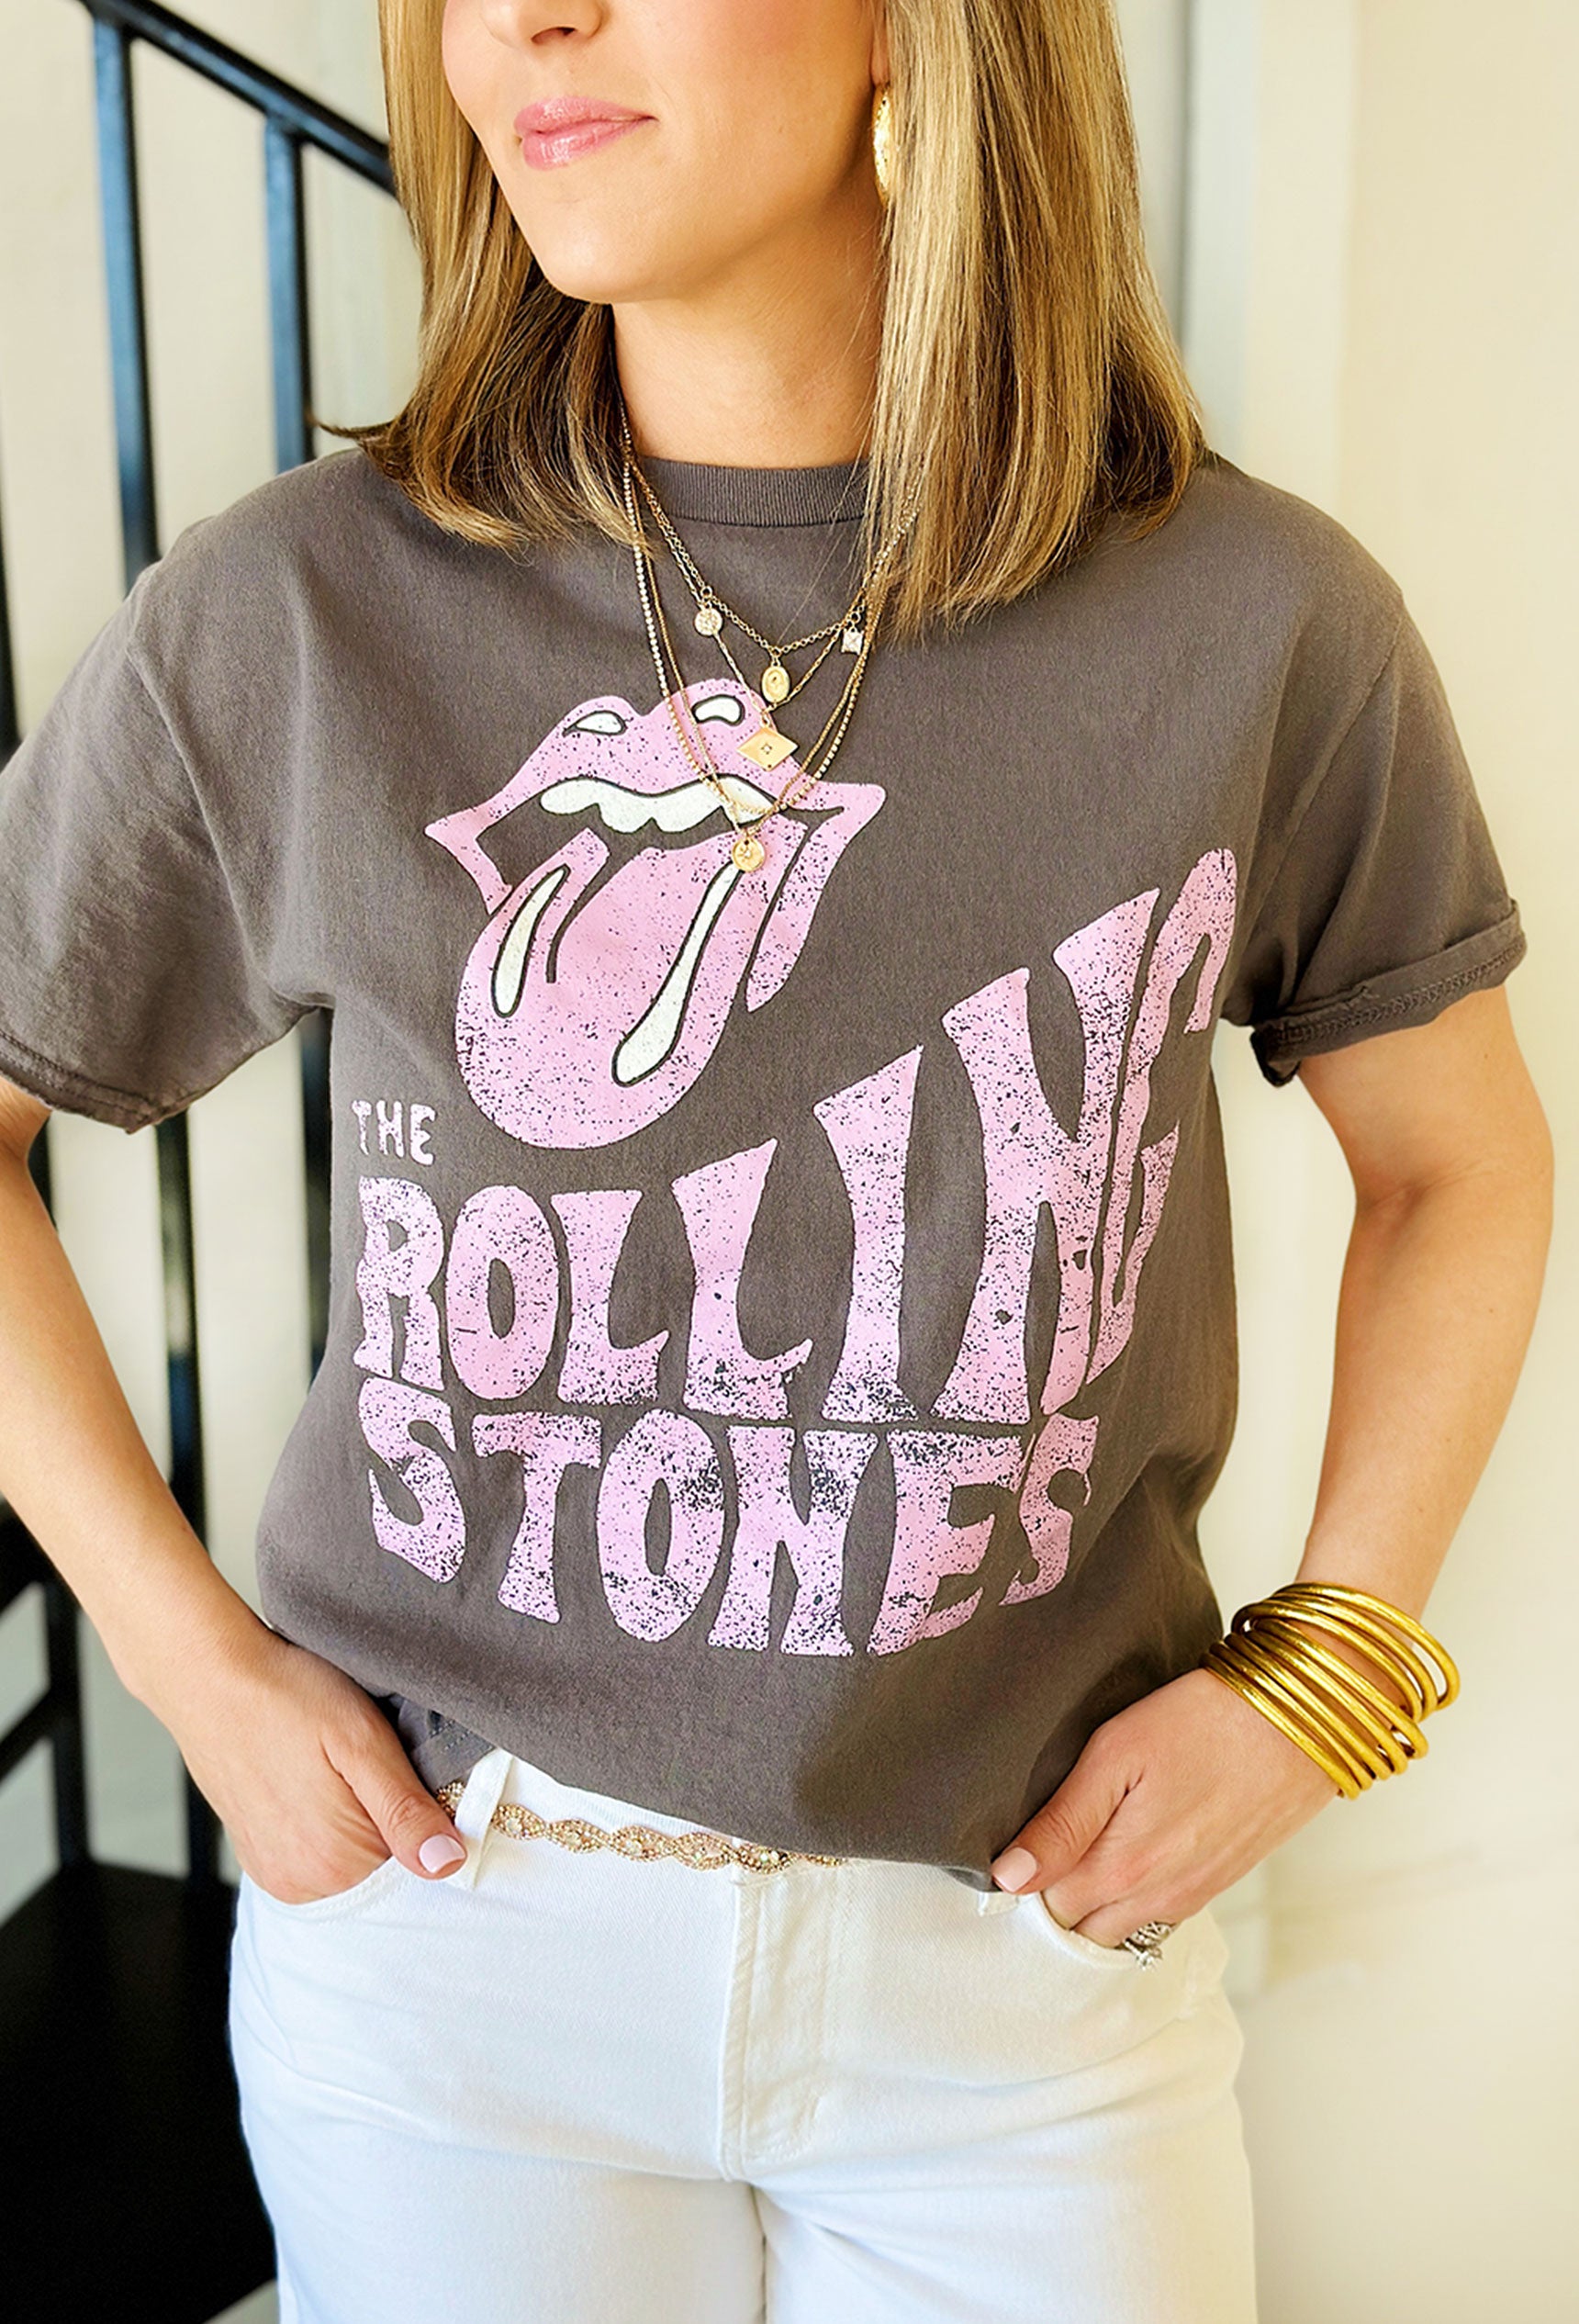 Gray Rolling Stones Graphic Tee, grey graphic t-shirt with "the rolling stones logo" on the front in purple lettering